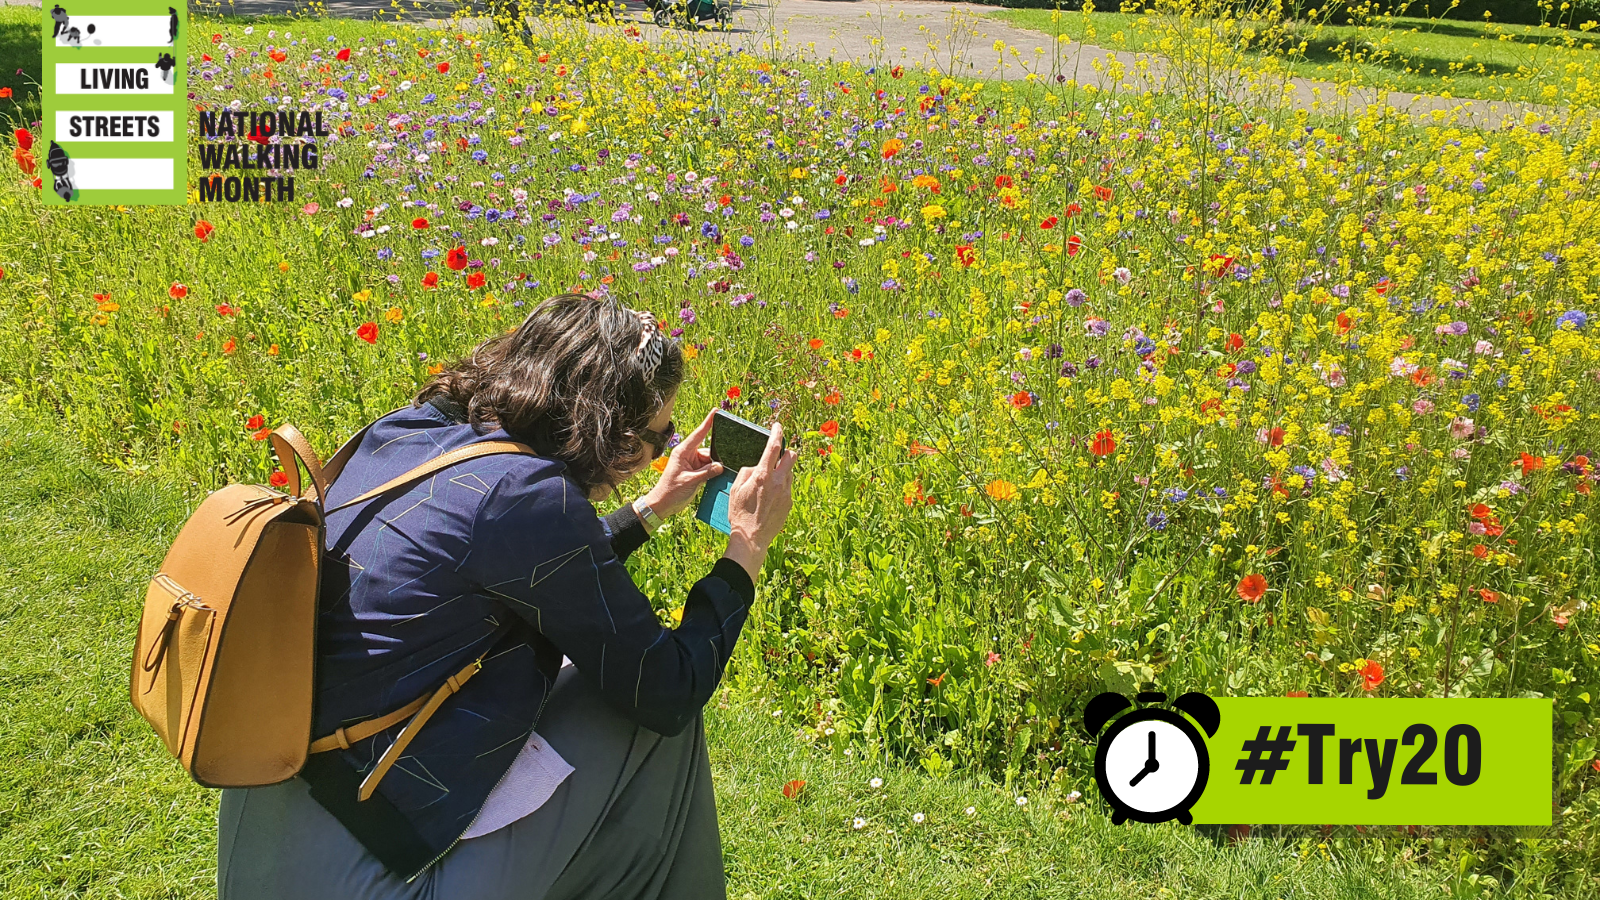 a woman crouches down to take a photo of wildflowers